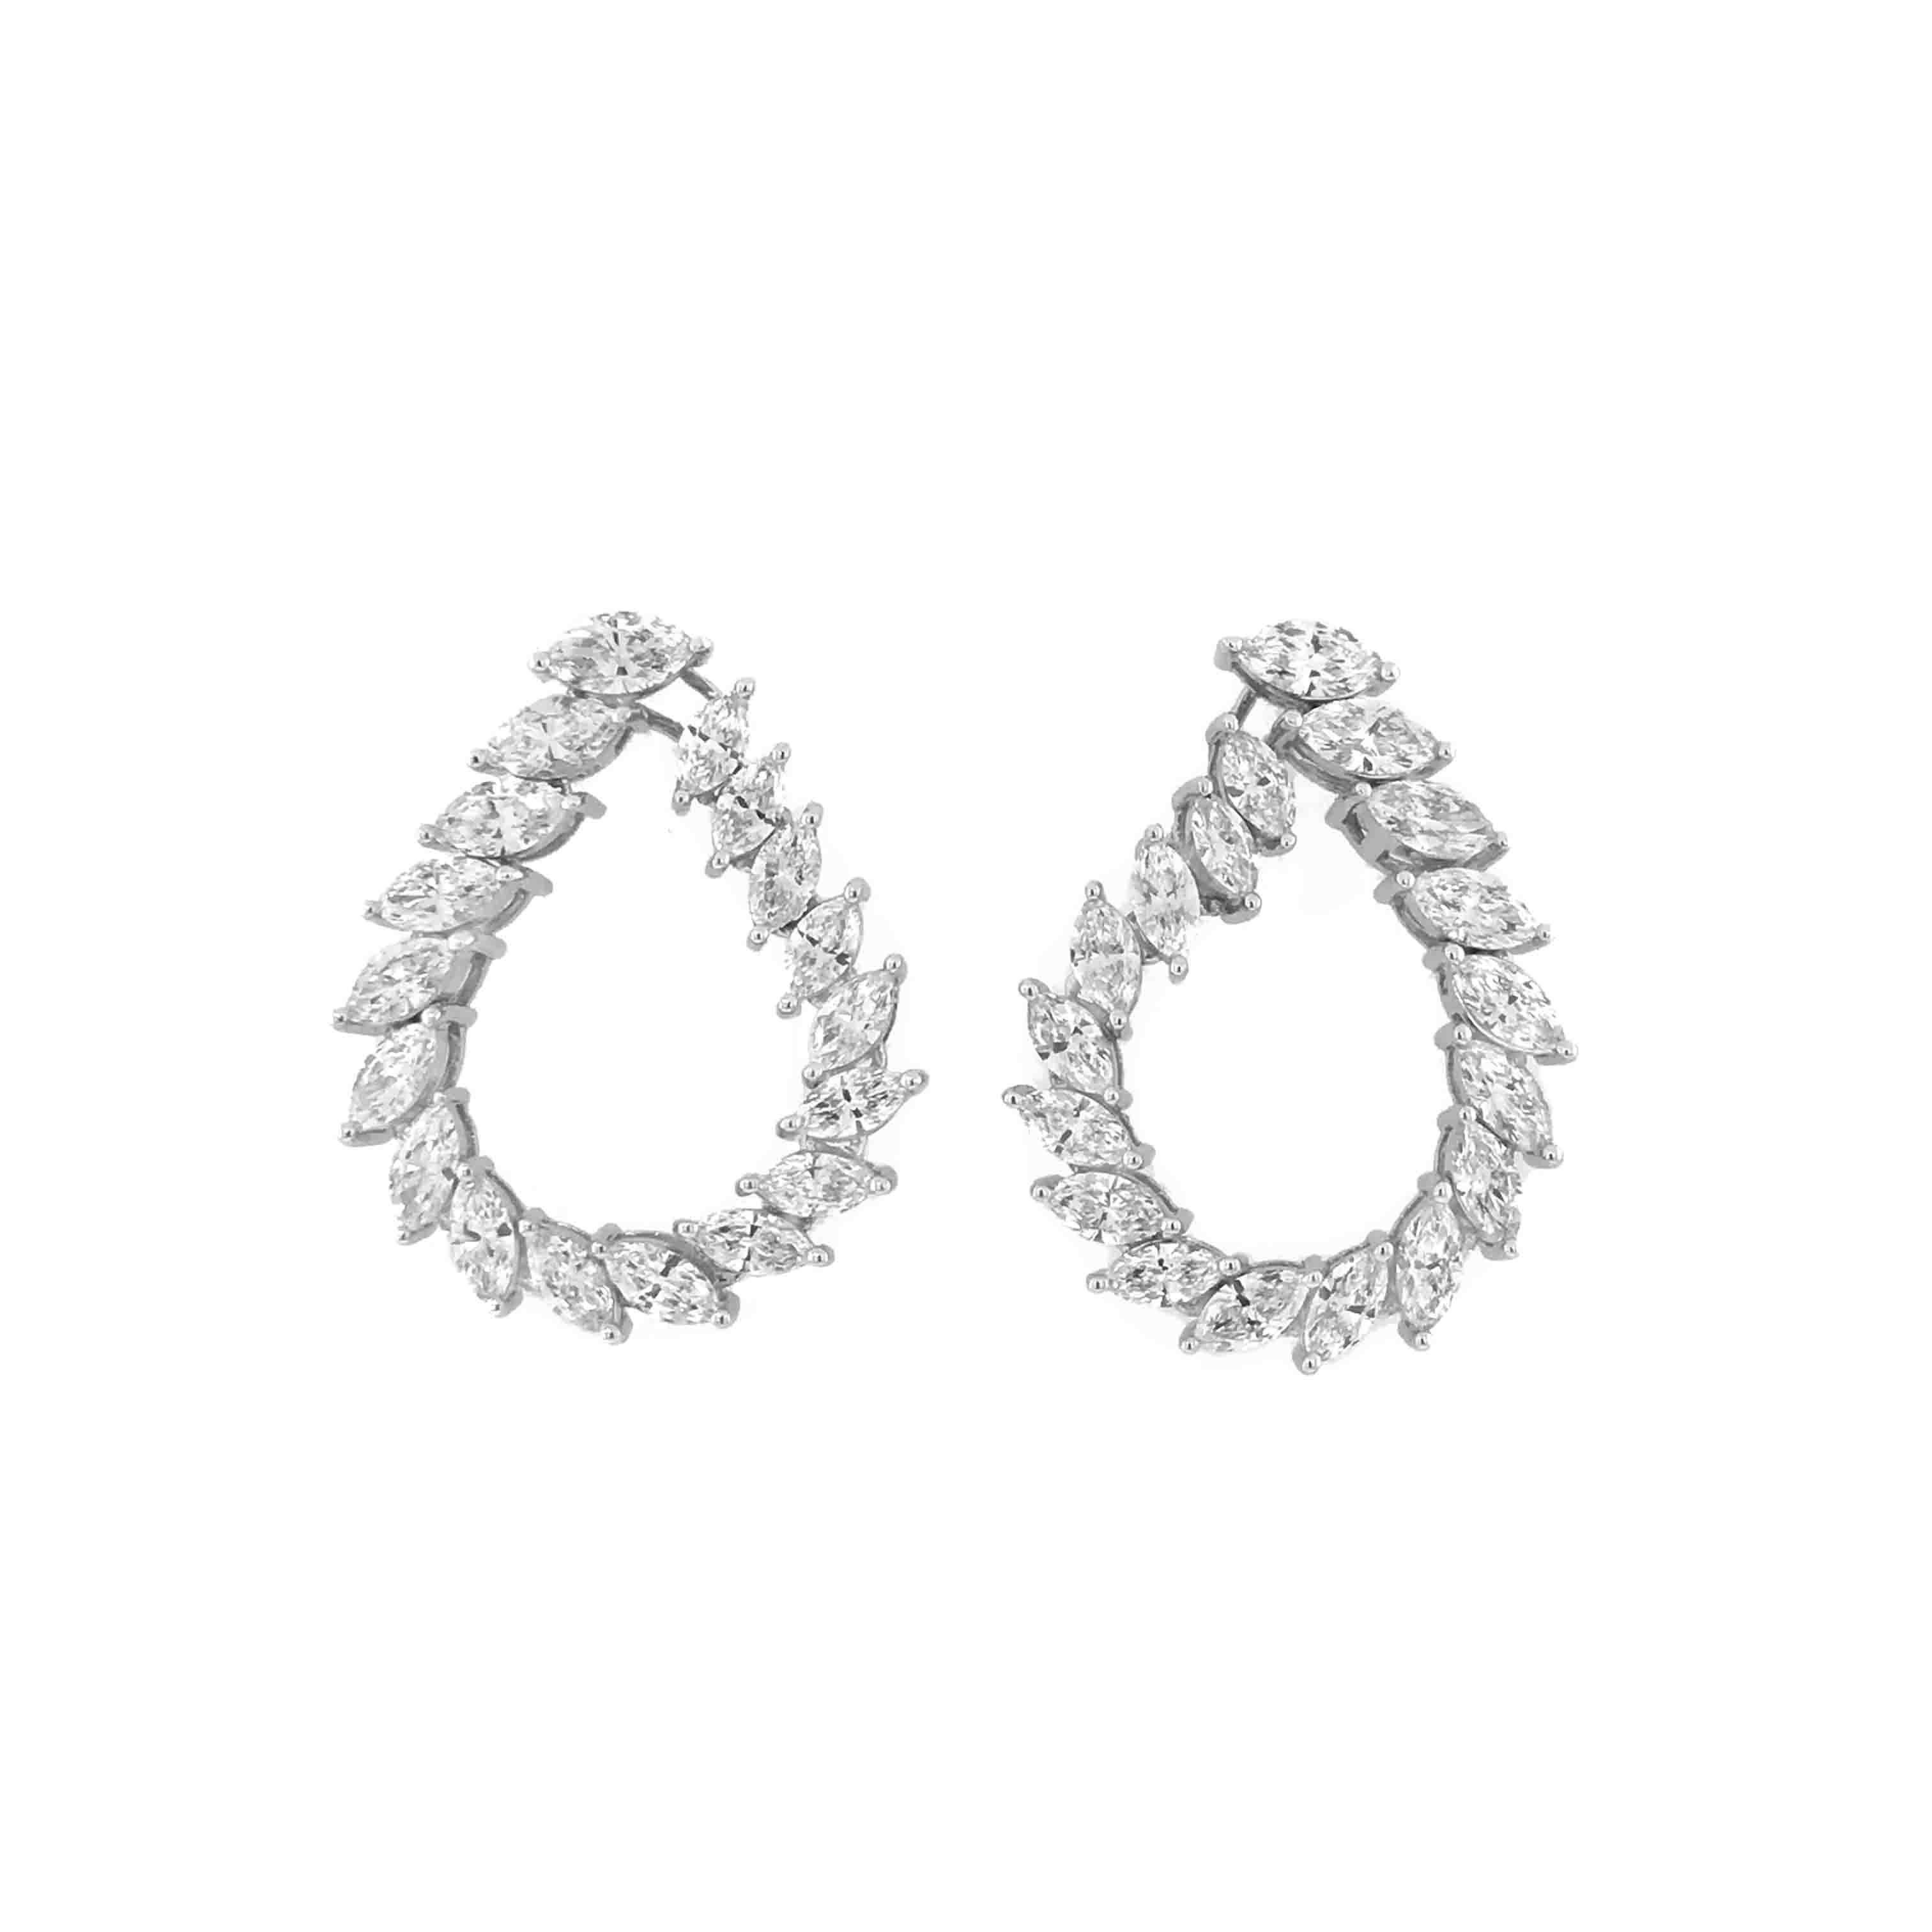 For the extravagant. Embellished with 36 sparkling marquise cut diamonds and wrapped in the sublime 18kt white gold.

The Nysa diamond earrings can be worn as hoops & also suavely convert as dangling line earrings. So you can adorn the charm of two